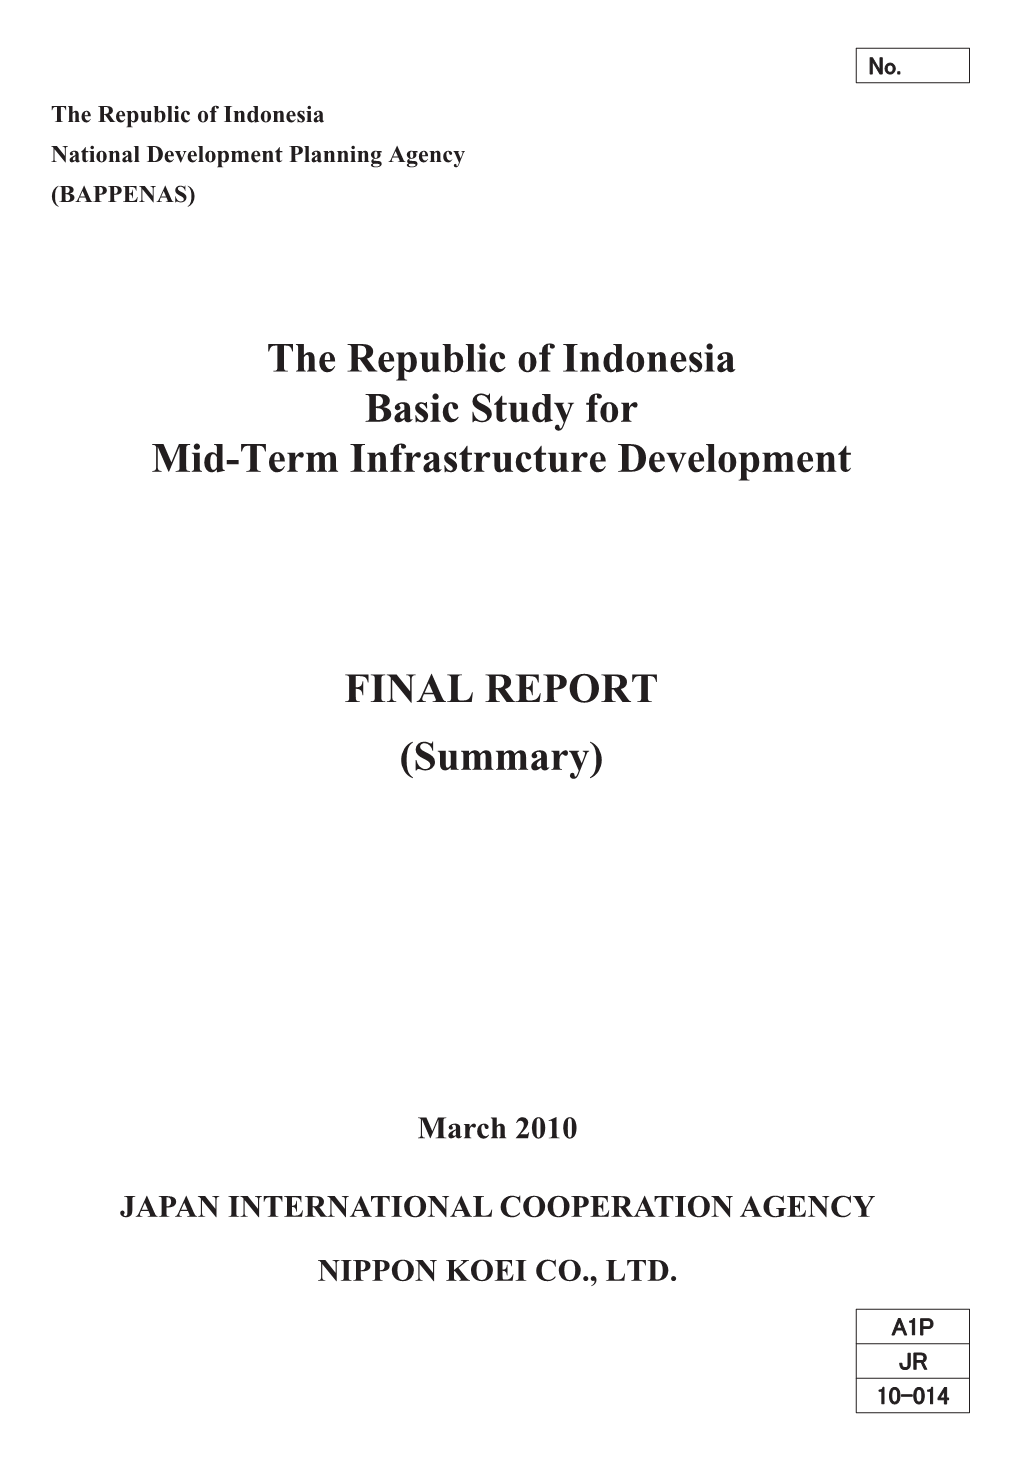 The Republic of Indonesia Basic Study for Mid-Term Infrastructure Development FINAL REPORT